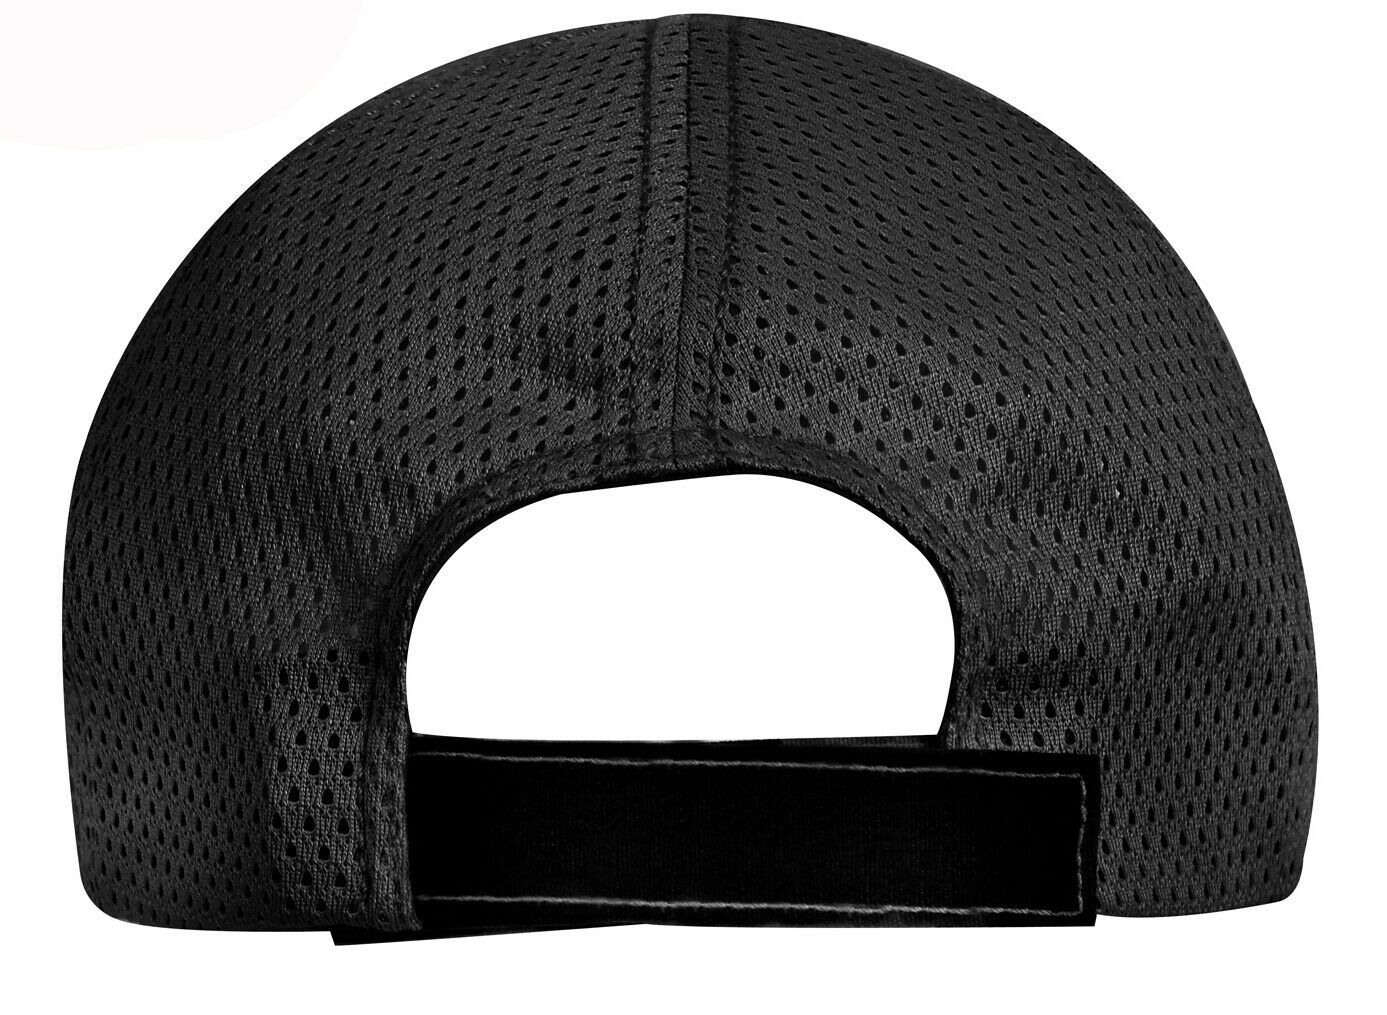 Rothco Mesh Back Thin Red Line Tactical Cap